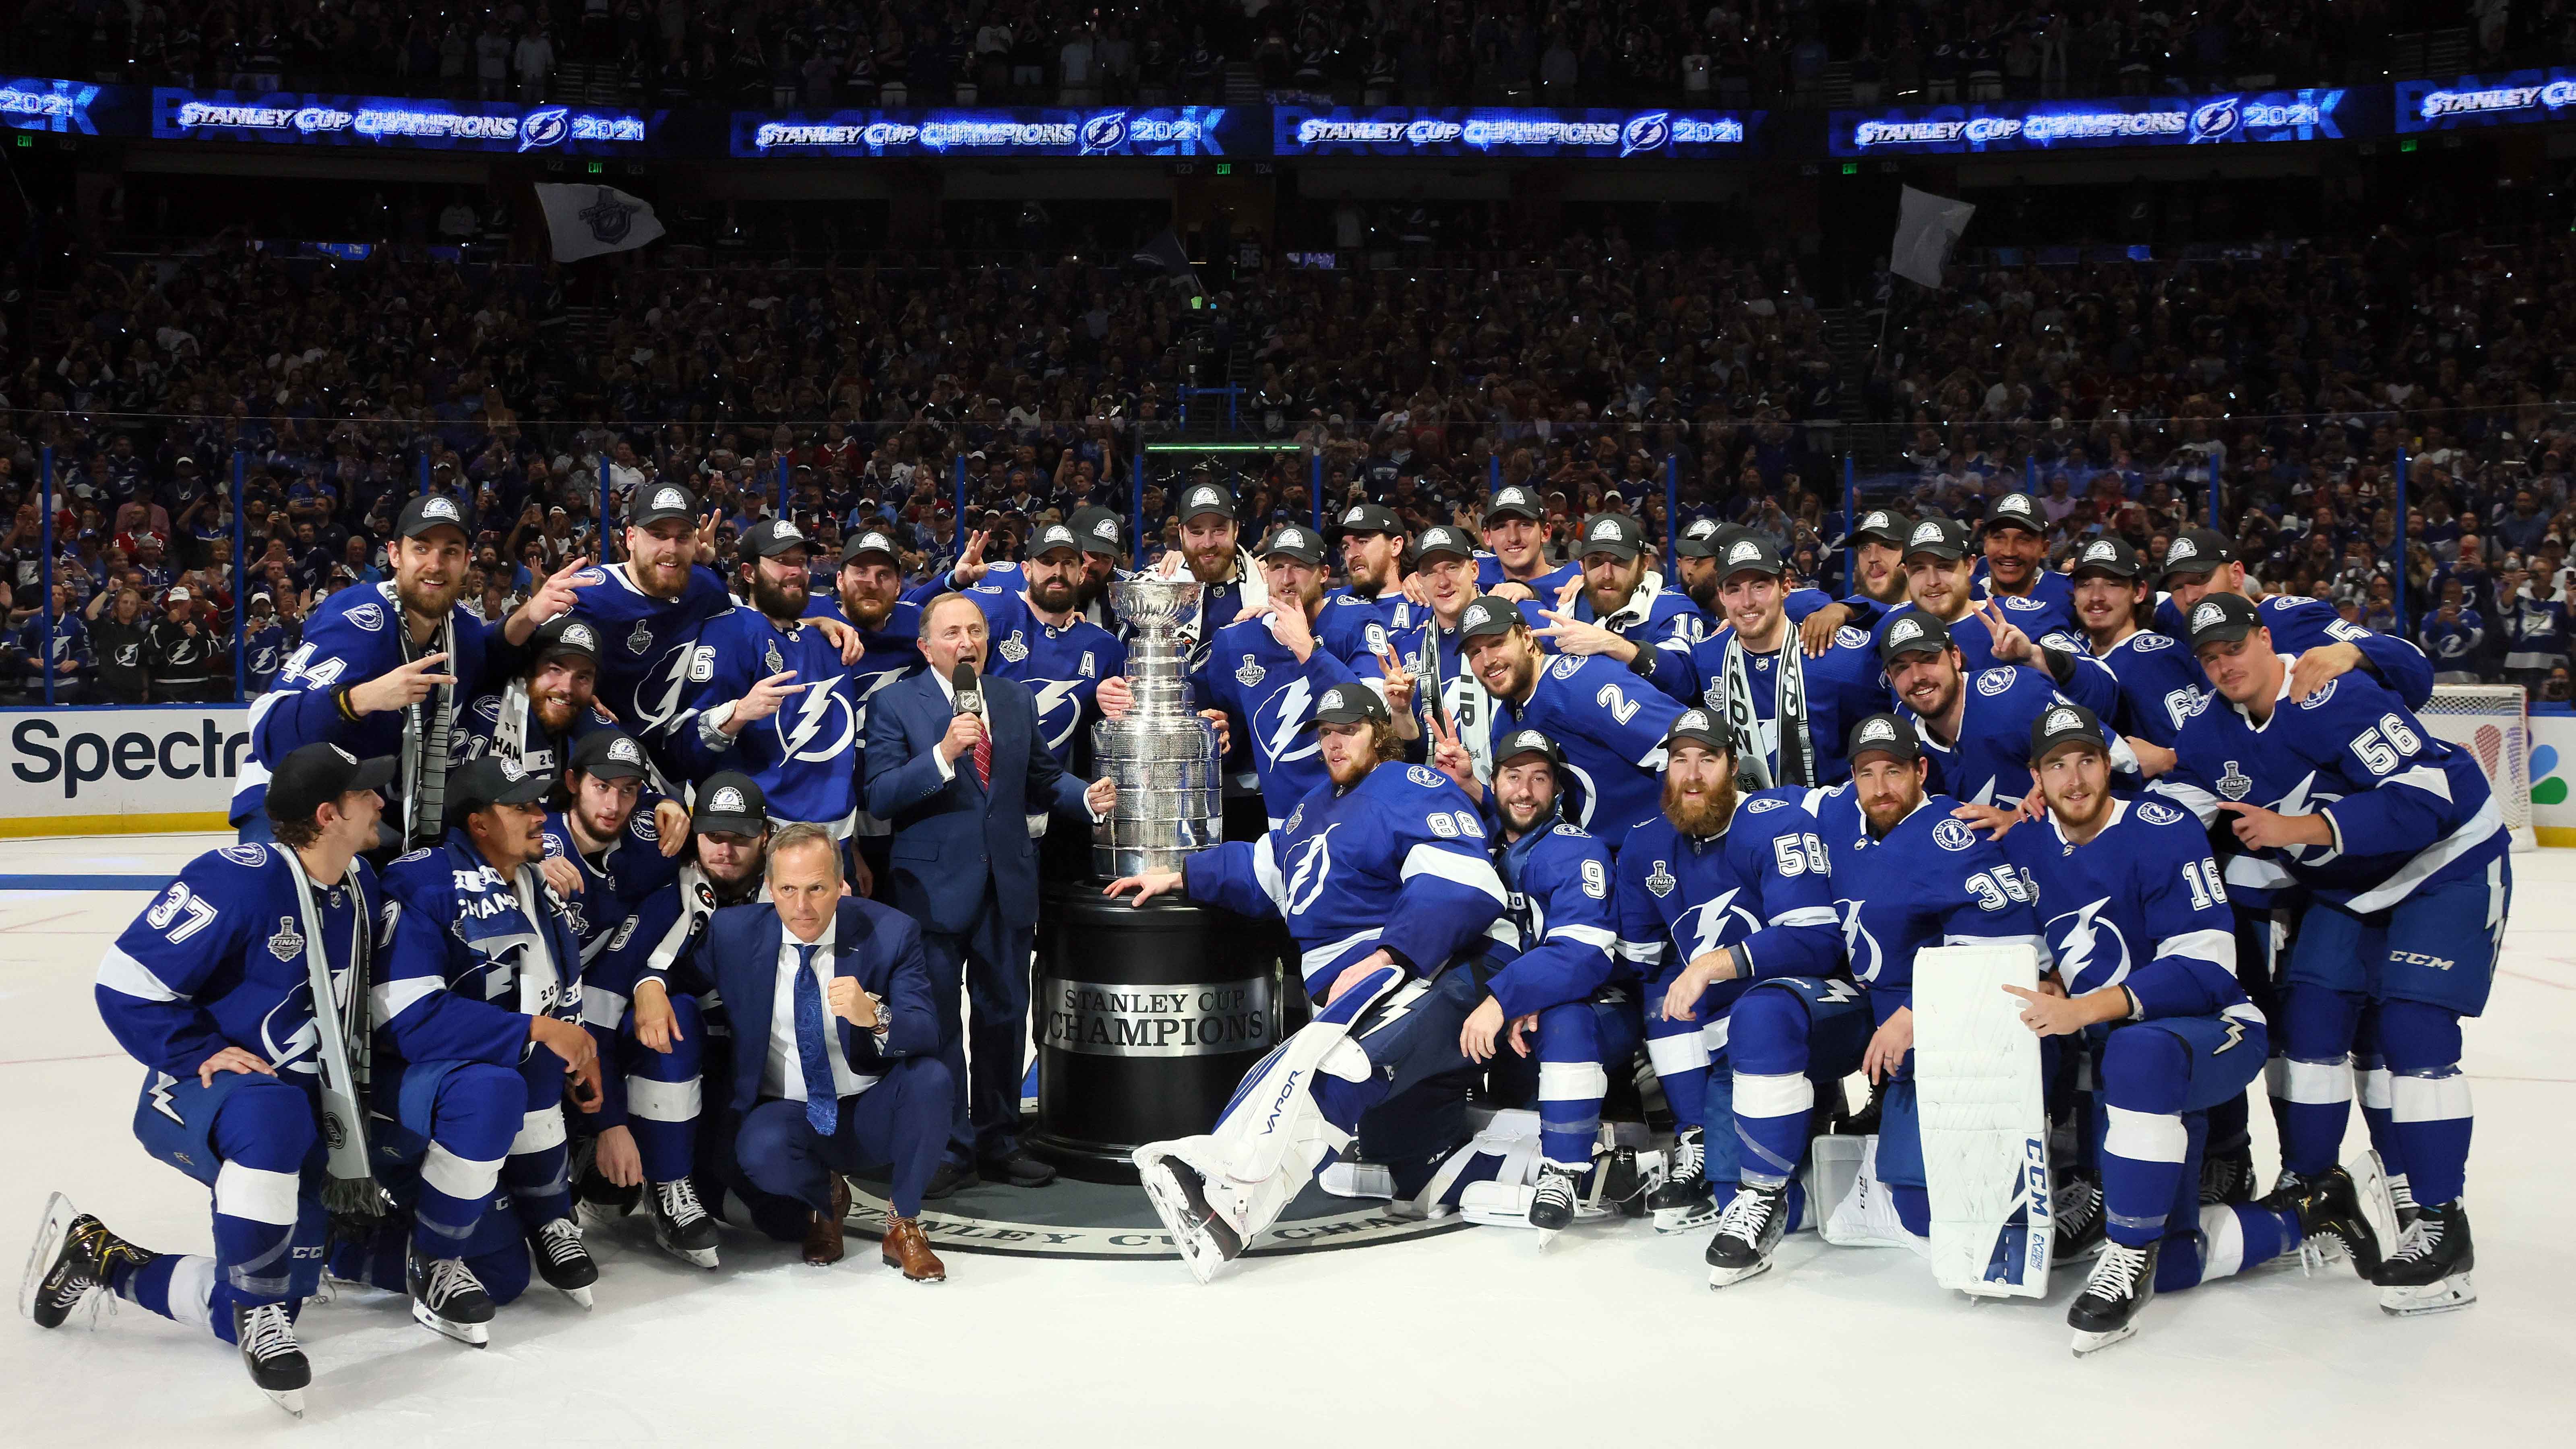 Lightning strikes twice: Tampa Bay wins second straight Stanley Cup, Trending